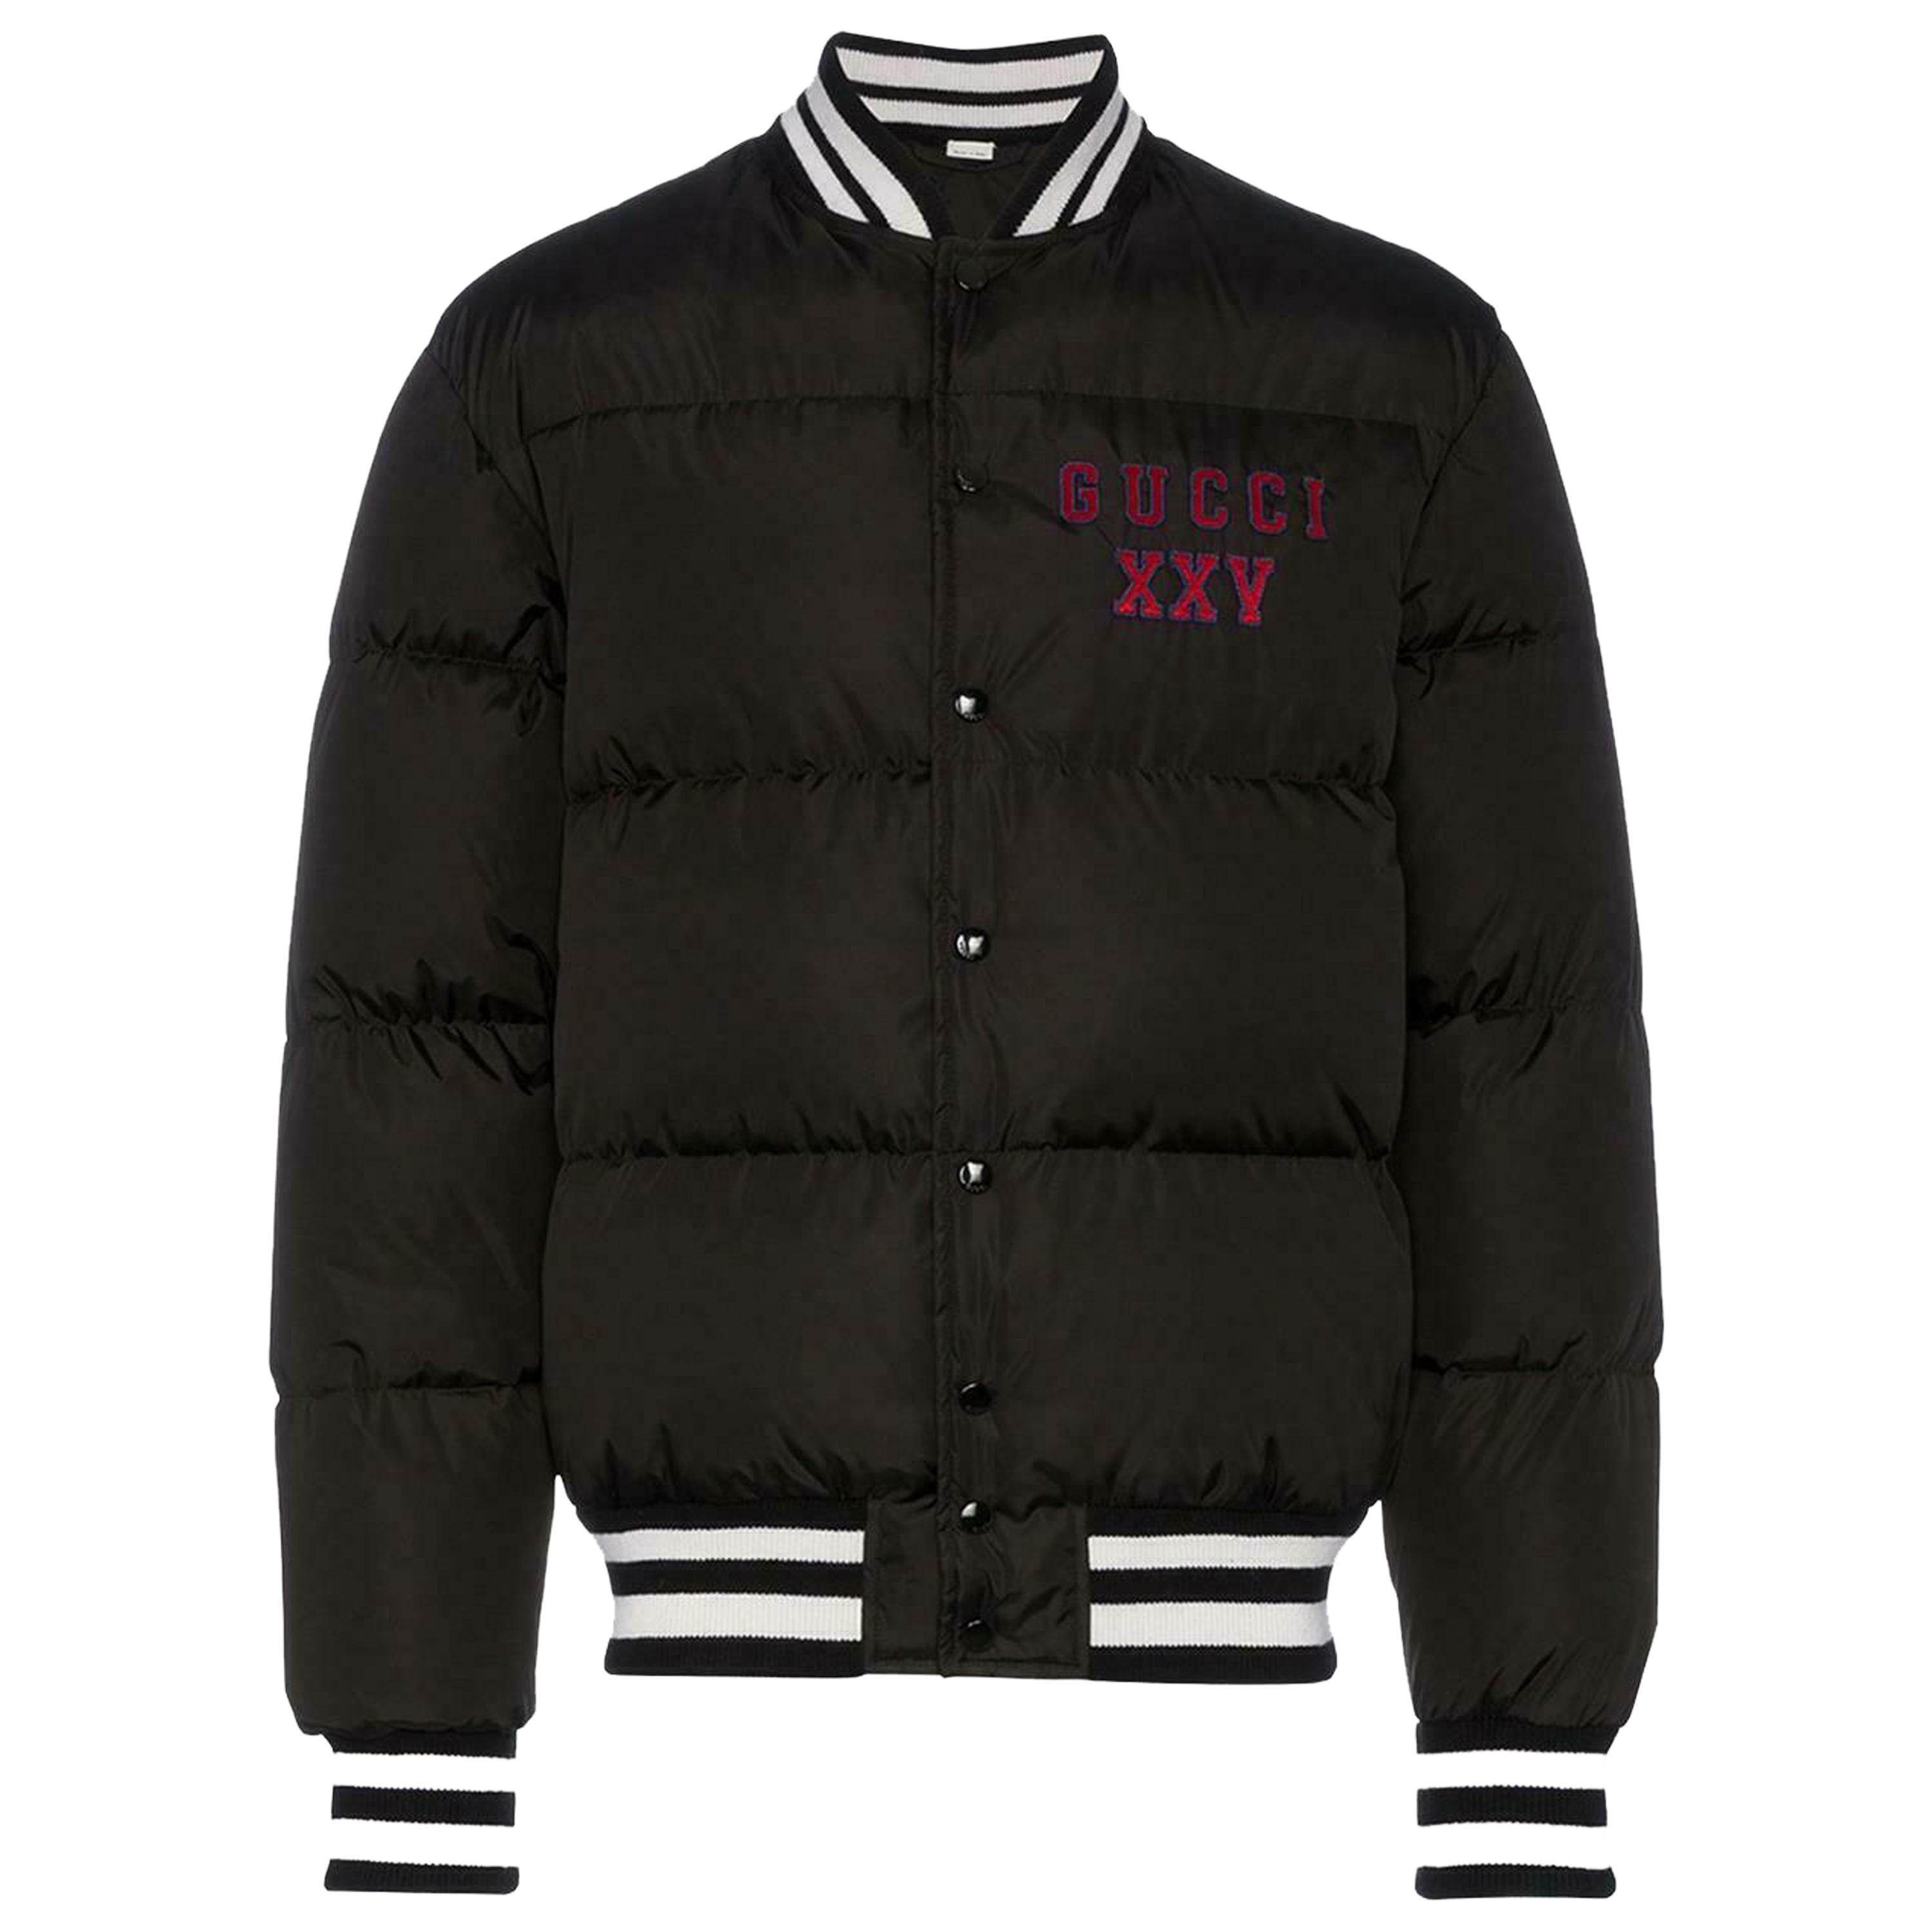 Gucci Guccification Denim Jacket with Mink Fur Trim and Shearling ...